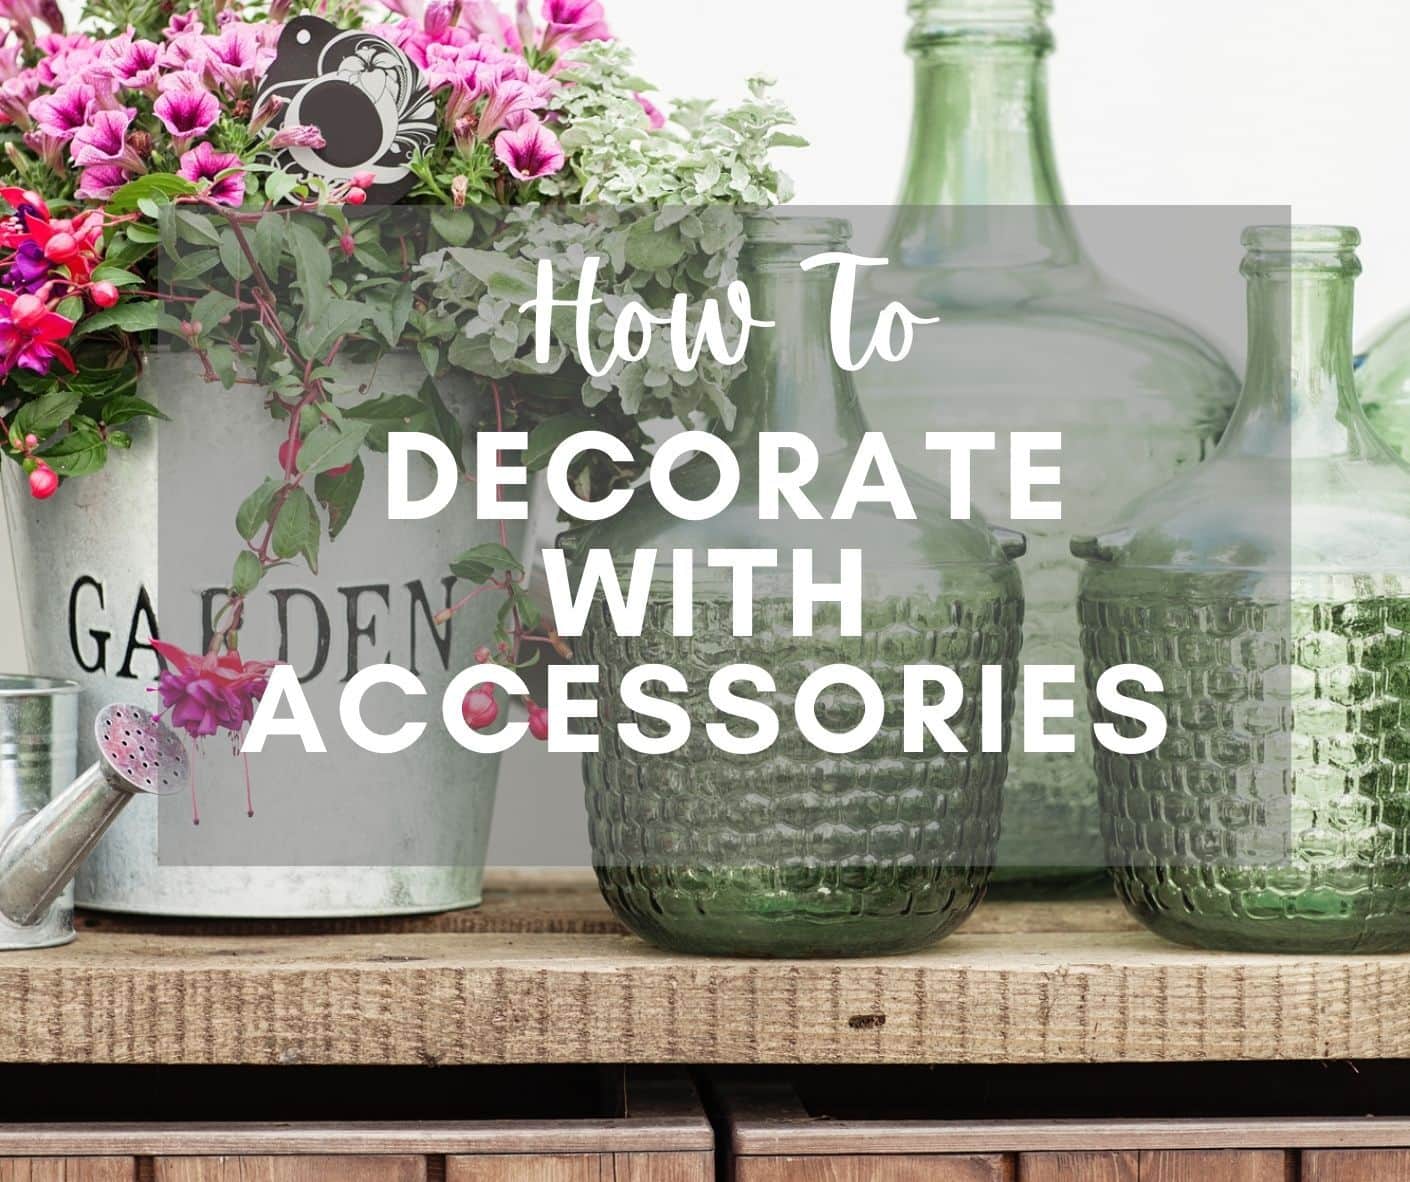 How to decorate with accessories - green glass bottles with white garden bucket with flowers